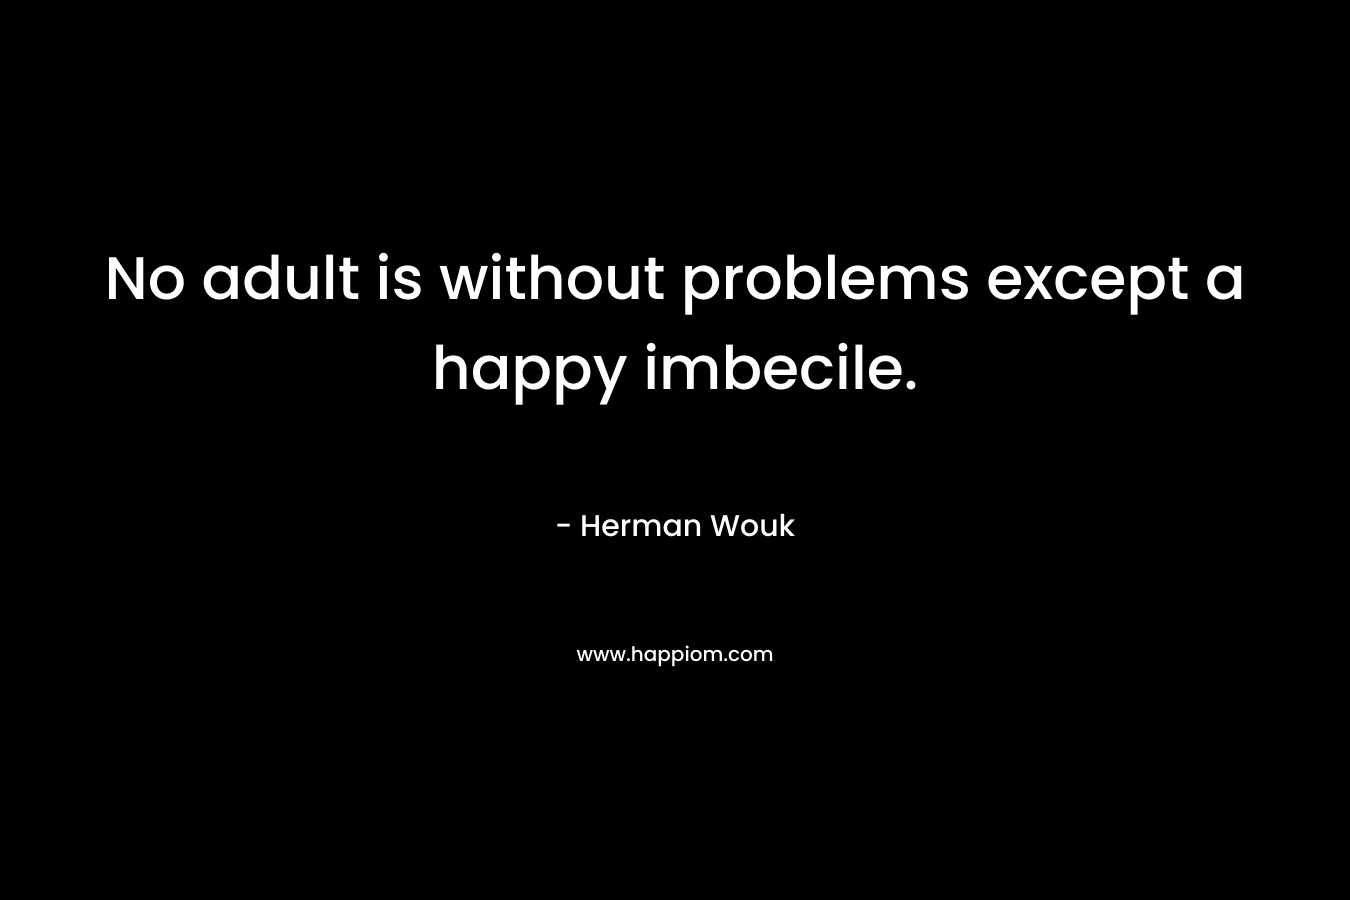 No adult is without problems except a happy imbecile.